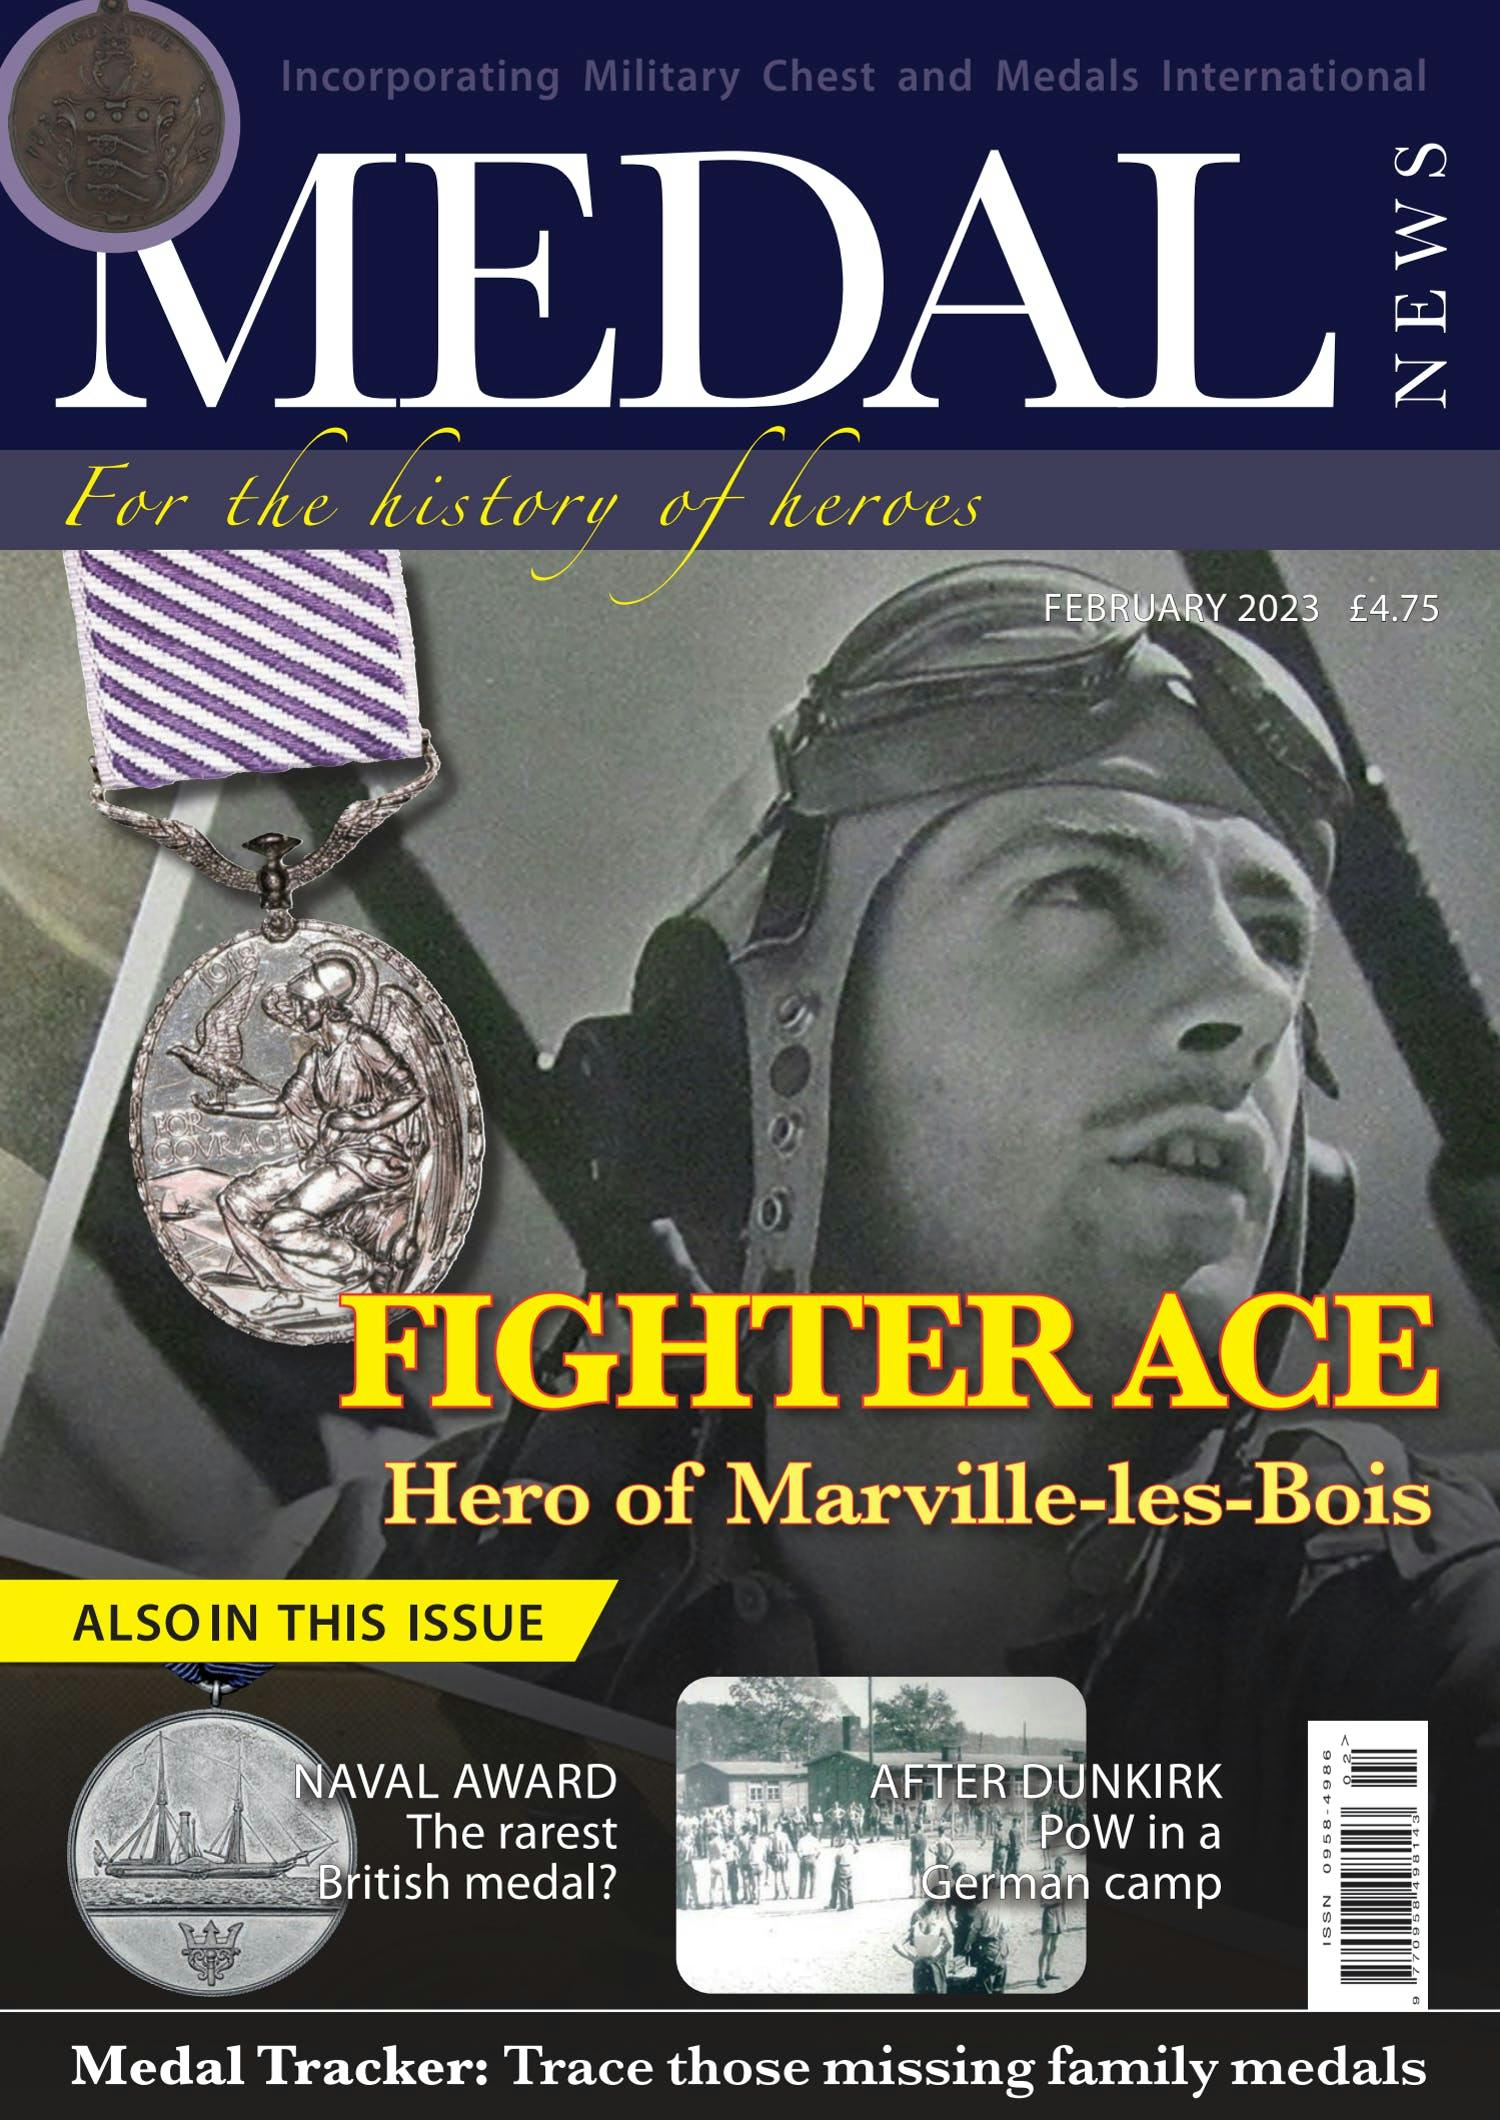 The front cover of Medal News, February 2023 - Volume 61, Number 2